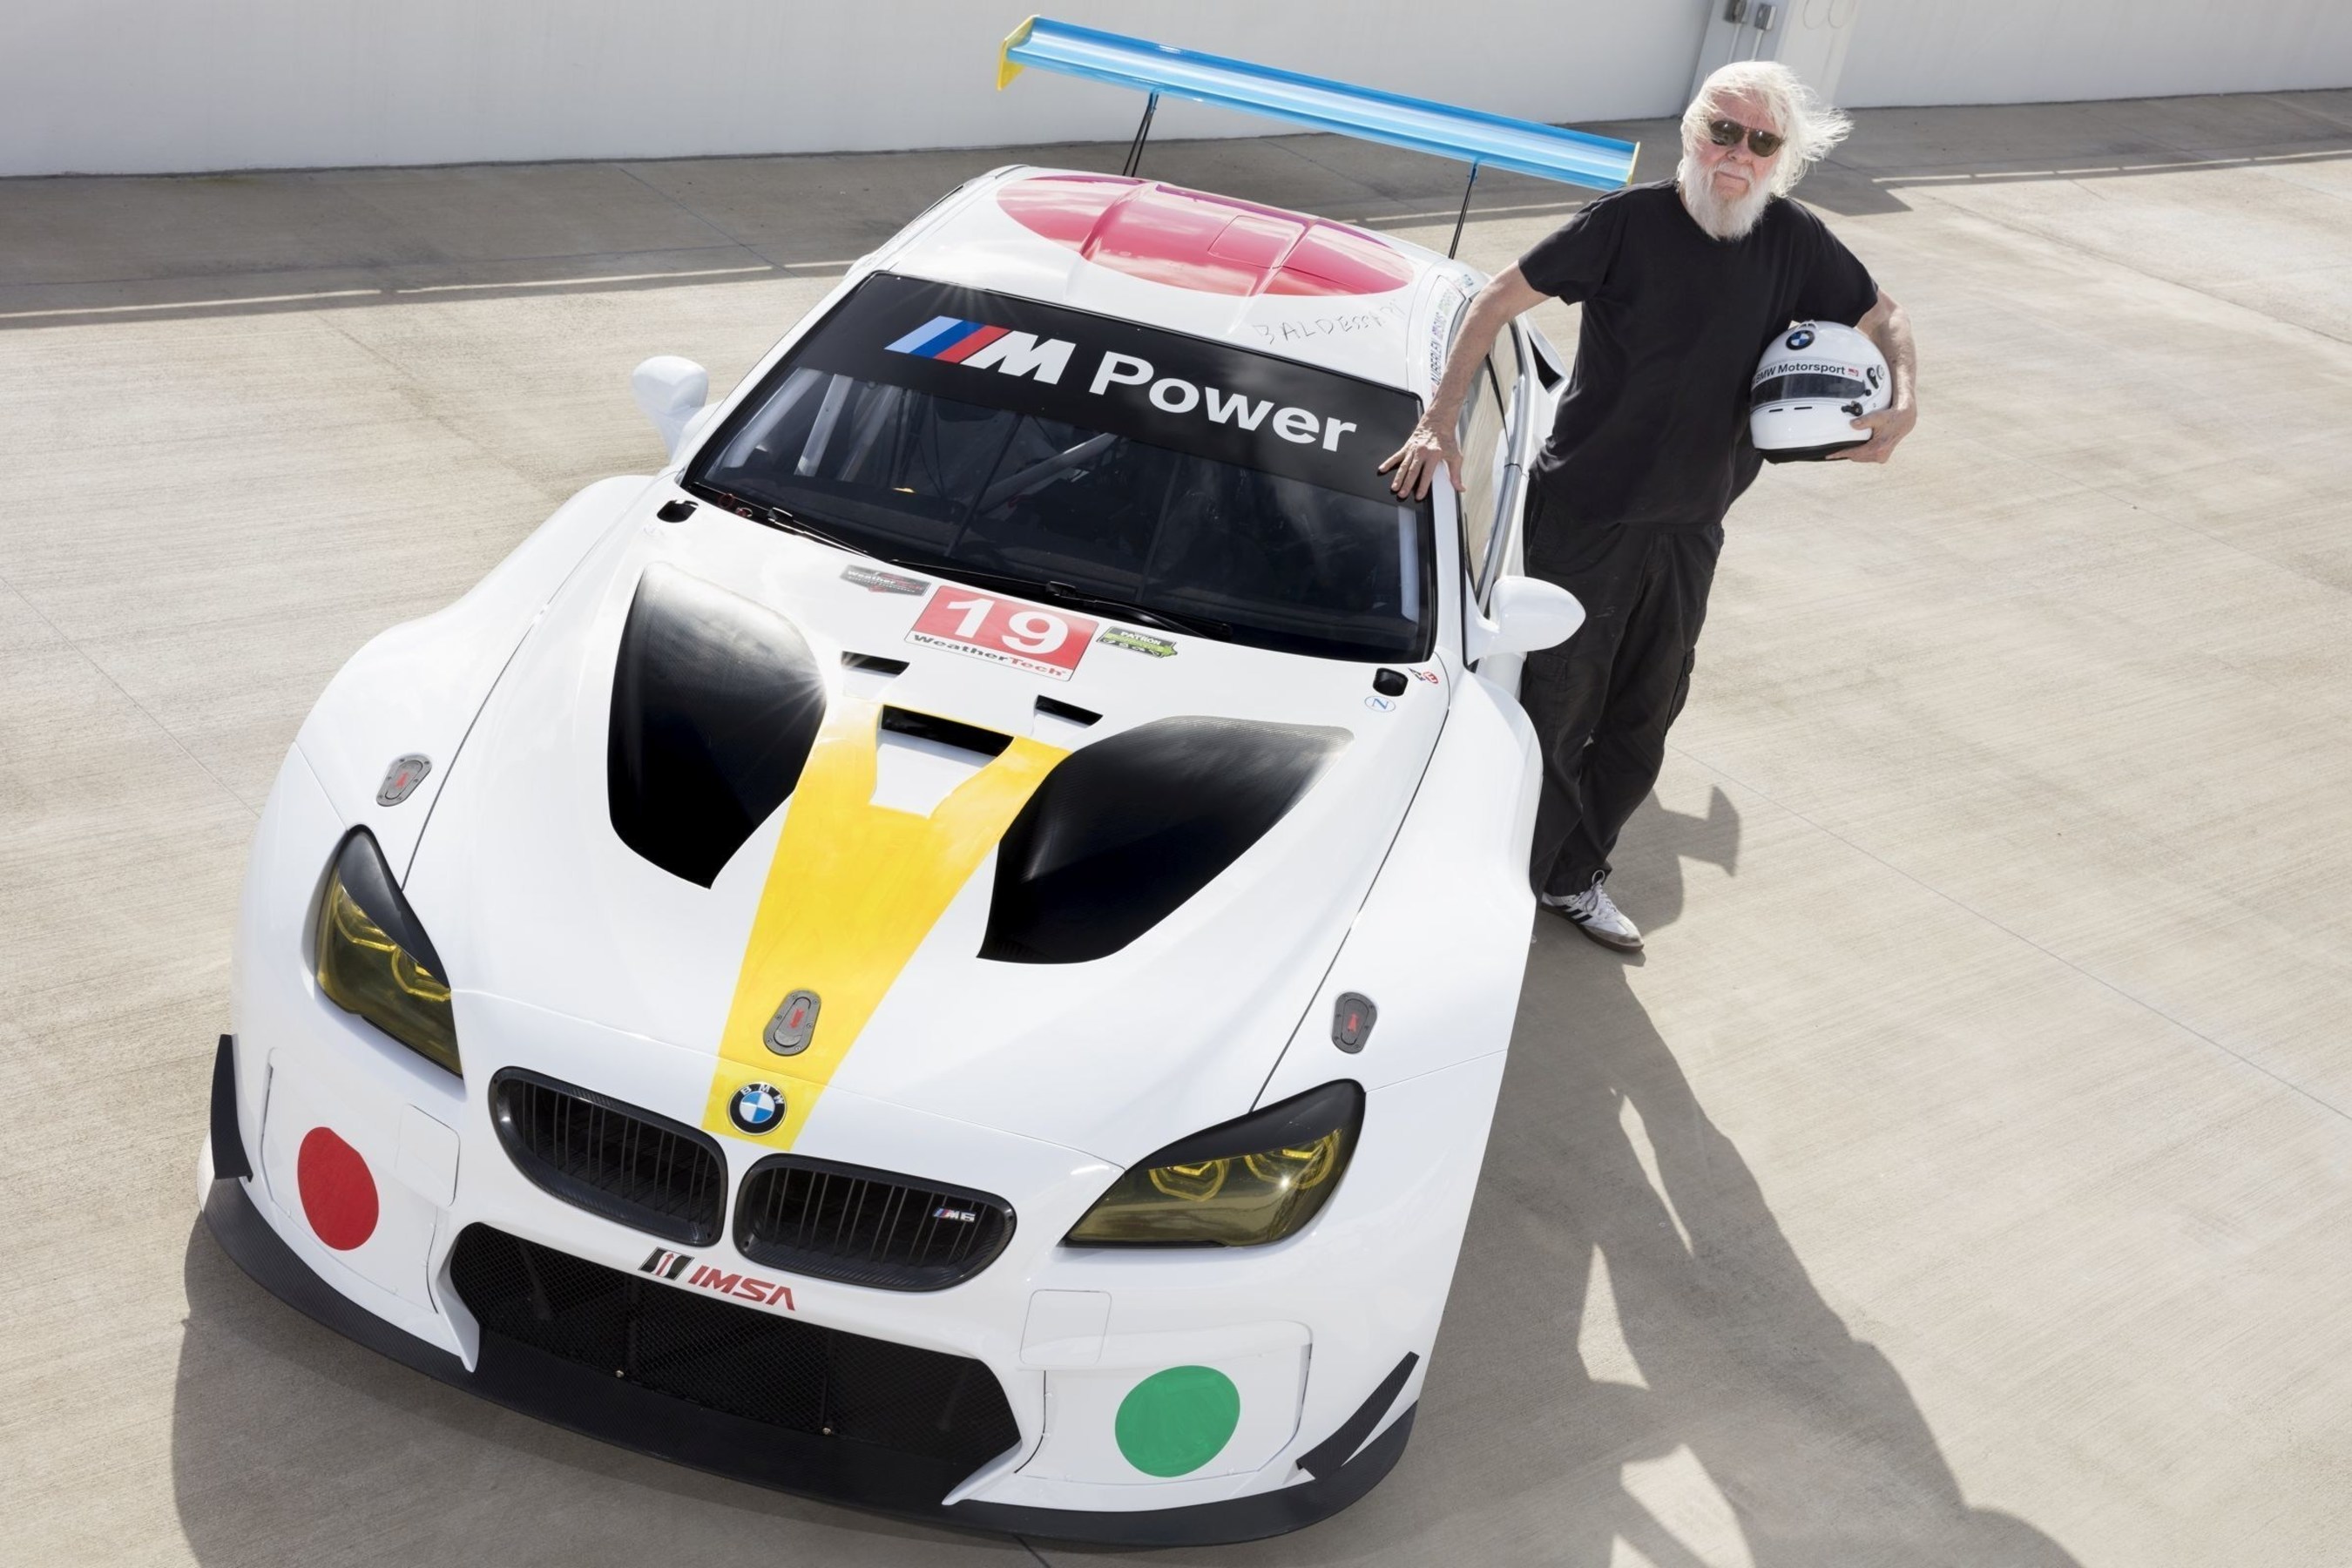 19th BMW Art Car by renowned American contemporary artist John Baldessari. The newest BMW Art Car made its world premiere at Art Basel in Miami Beach on Wednesday, November 30, 2016 (C) Photo by Chris Tedesco for BMW (PRNewsFoto/BMW Group)